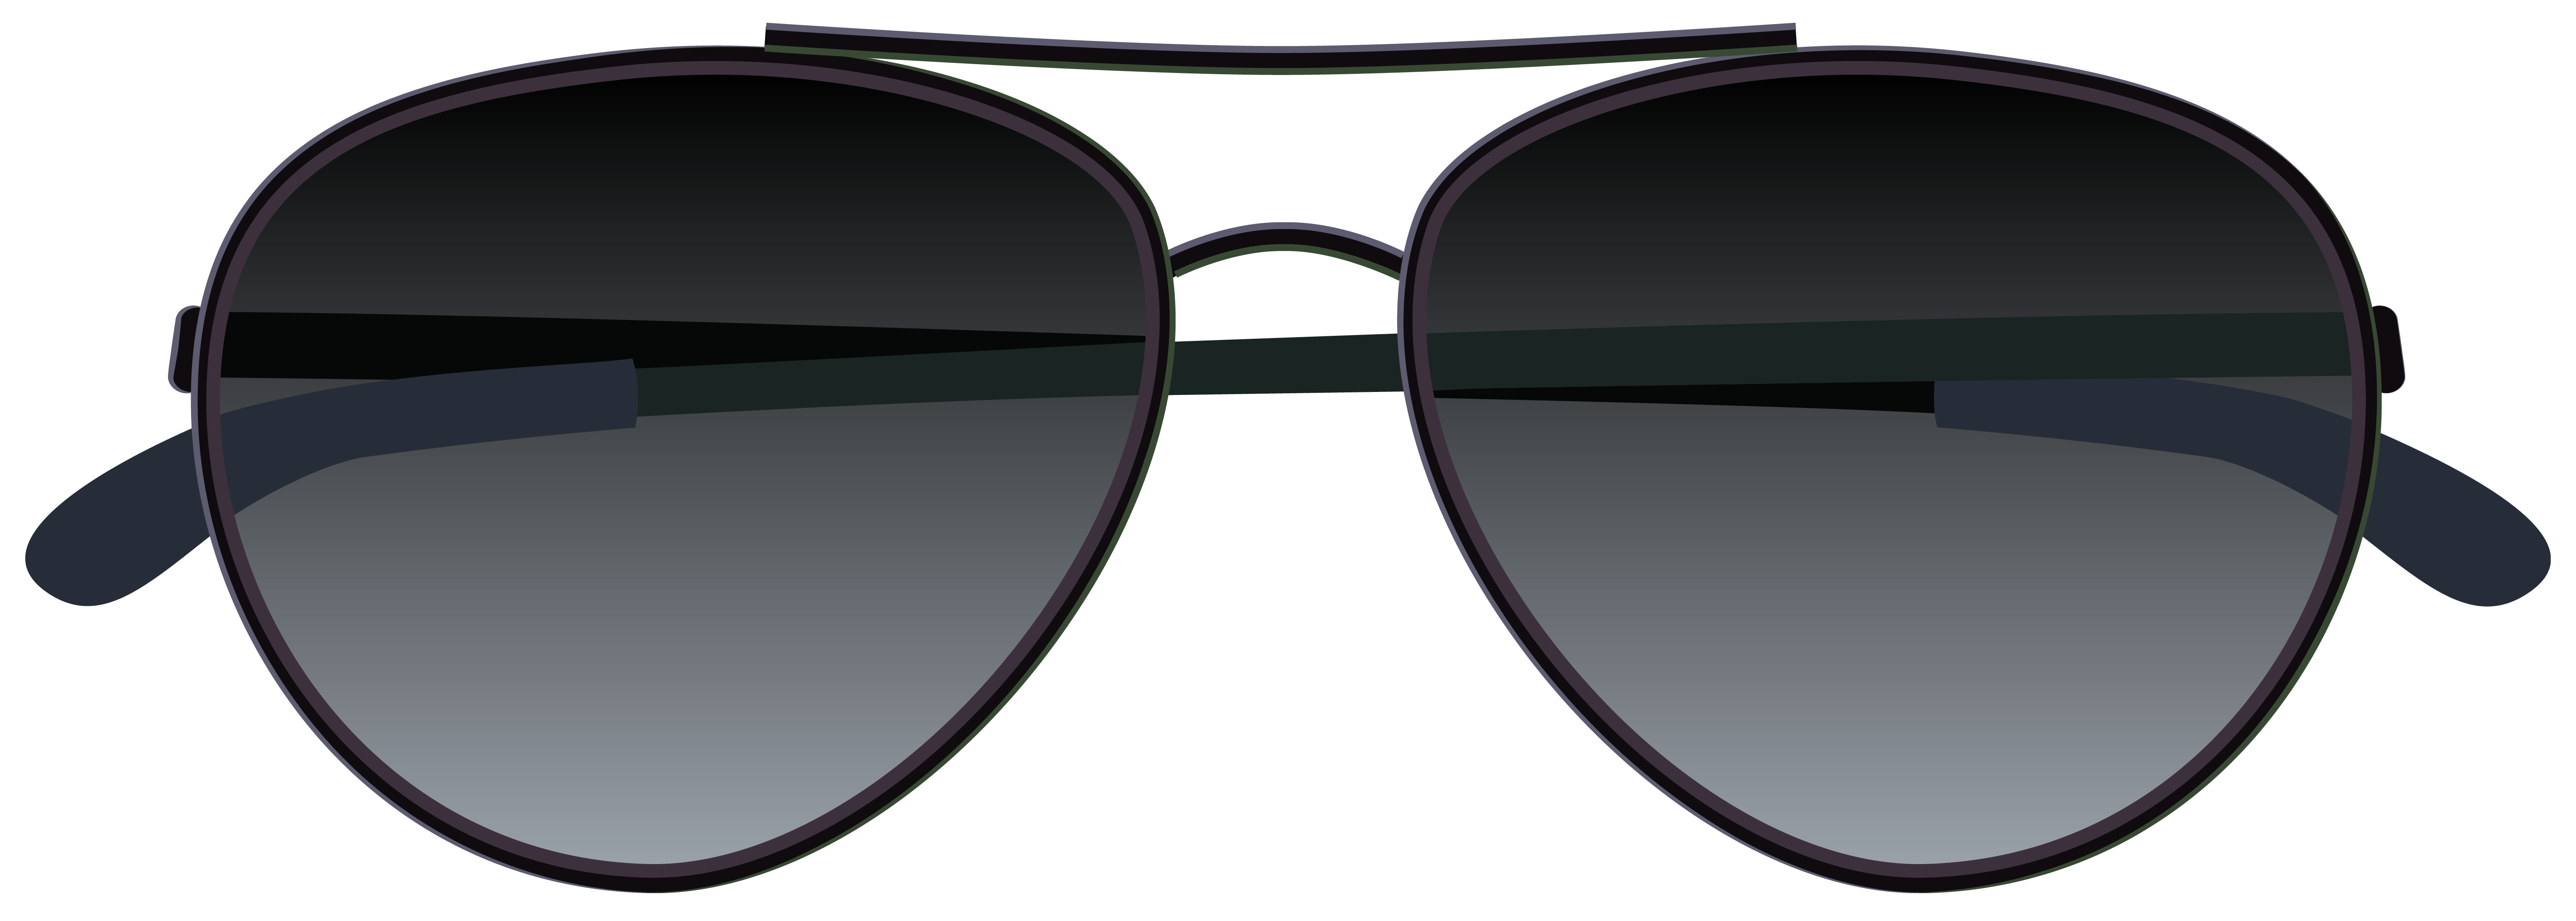 Sunglasses clip art free free clipart images - dbclipart.com